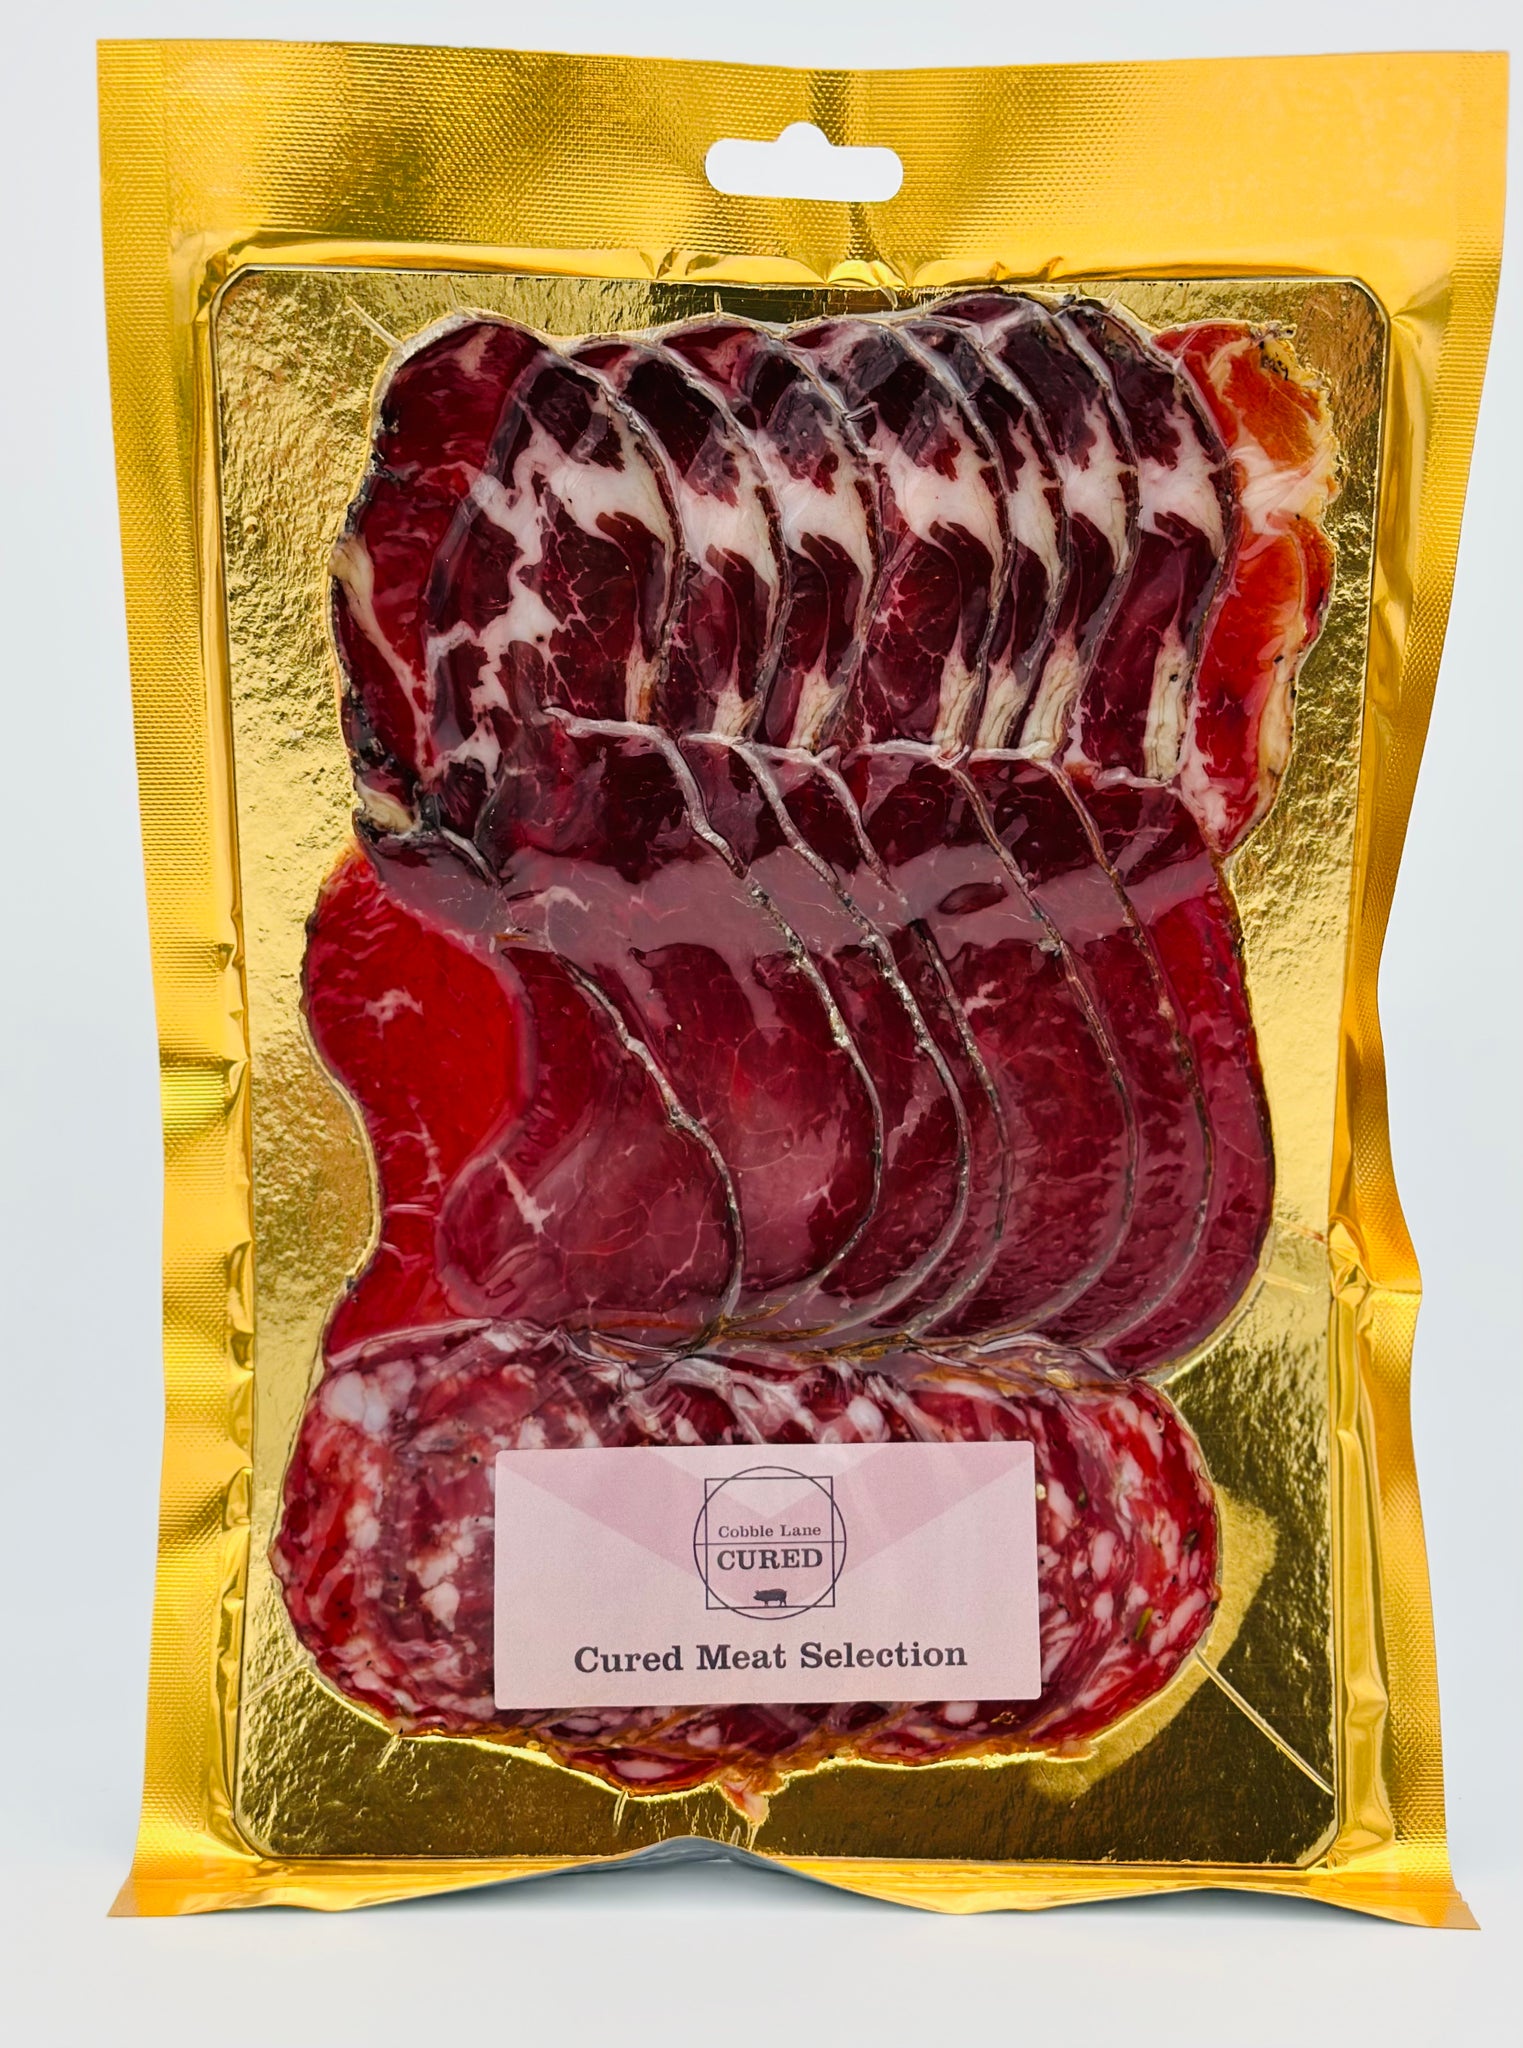 Cobble Lane Cured Meat Selection 150g